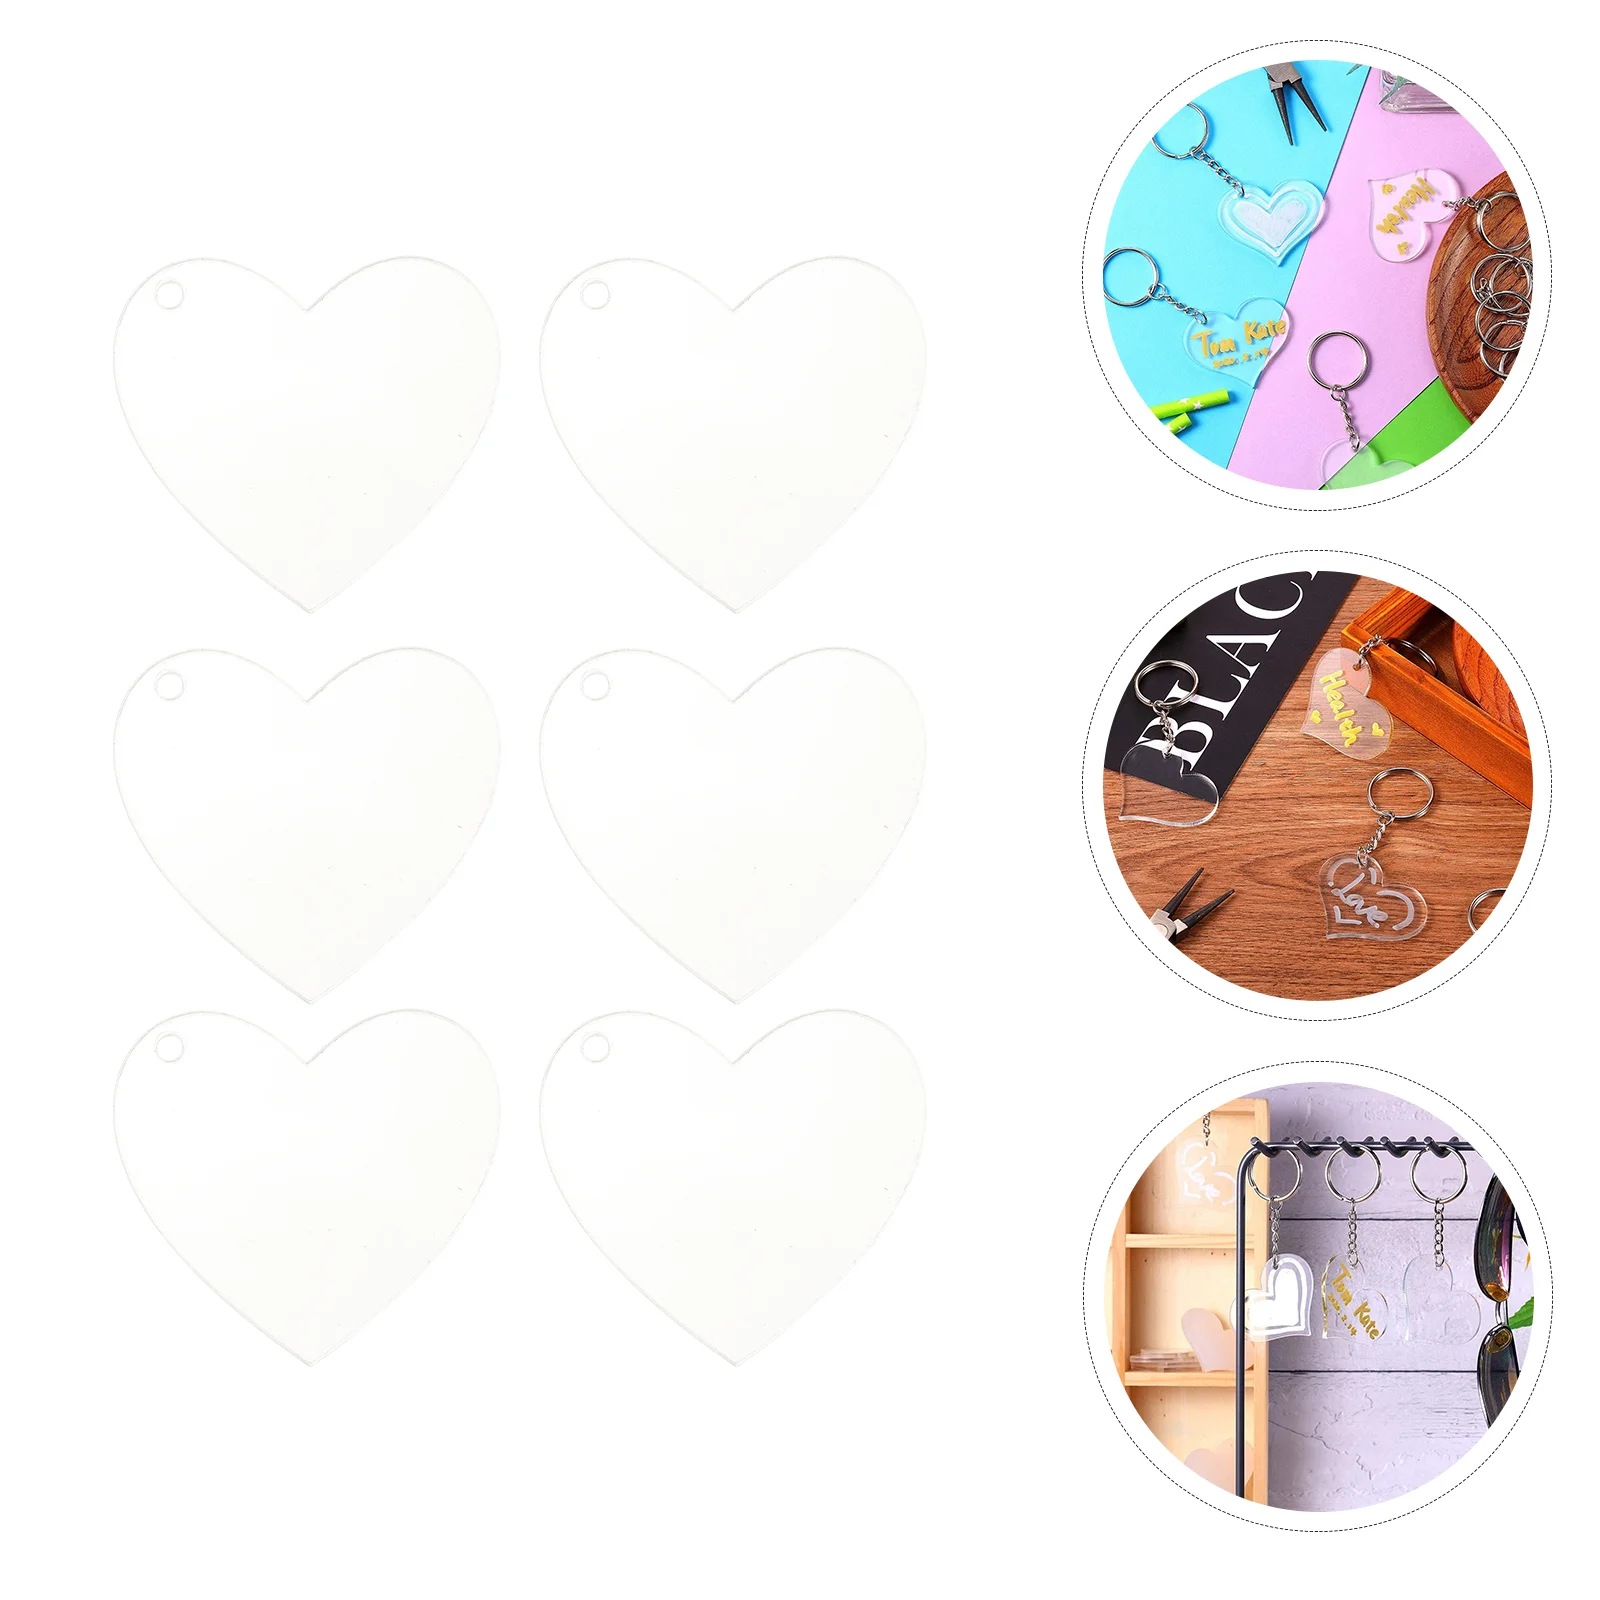 60 Pcs DIY Gift Key Holder Accessories Keychain Blank Pendant Clear Circle Keychains Heart Shaped Pendant